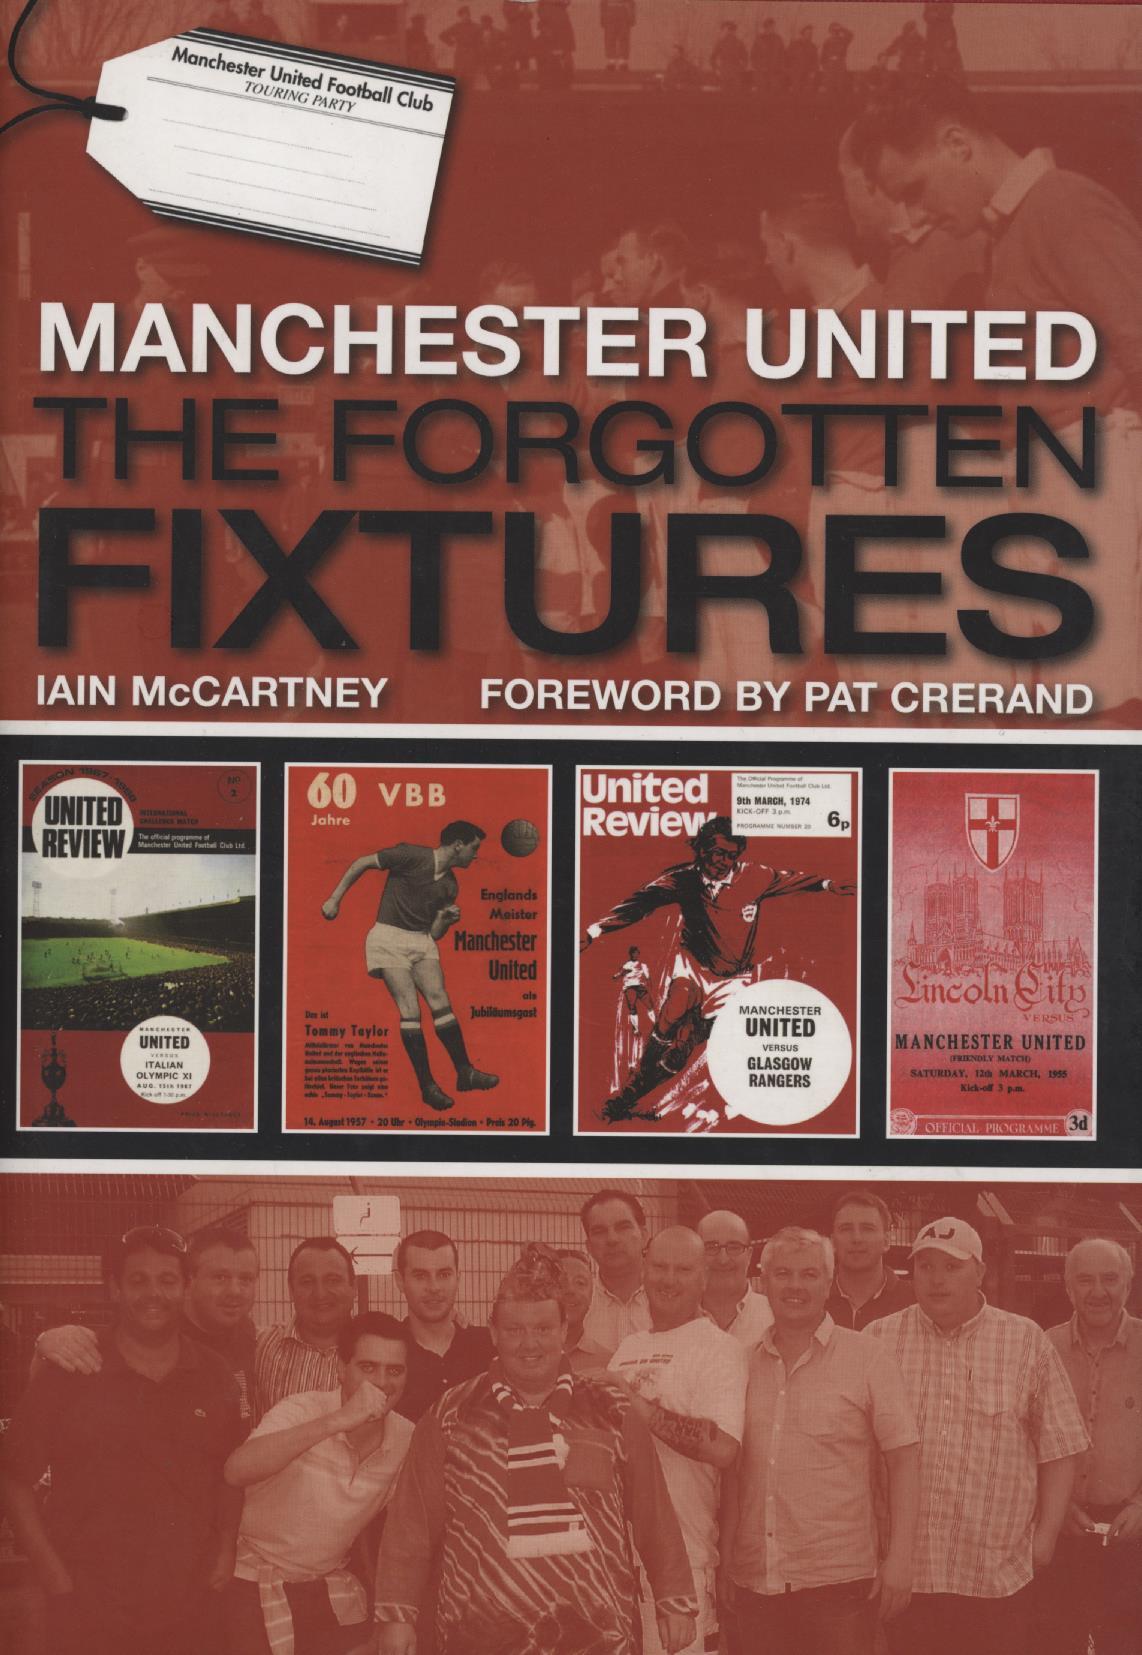 MANCHESTER UNITED THE FIXTURES Football Club History